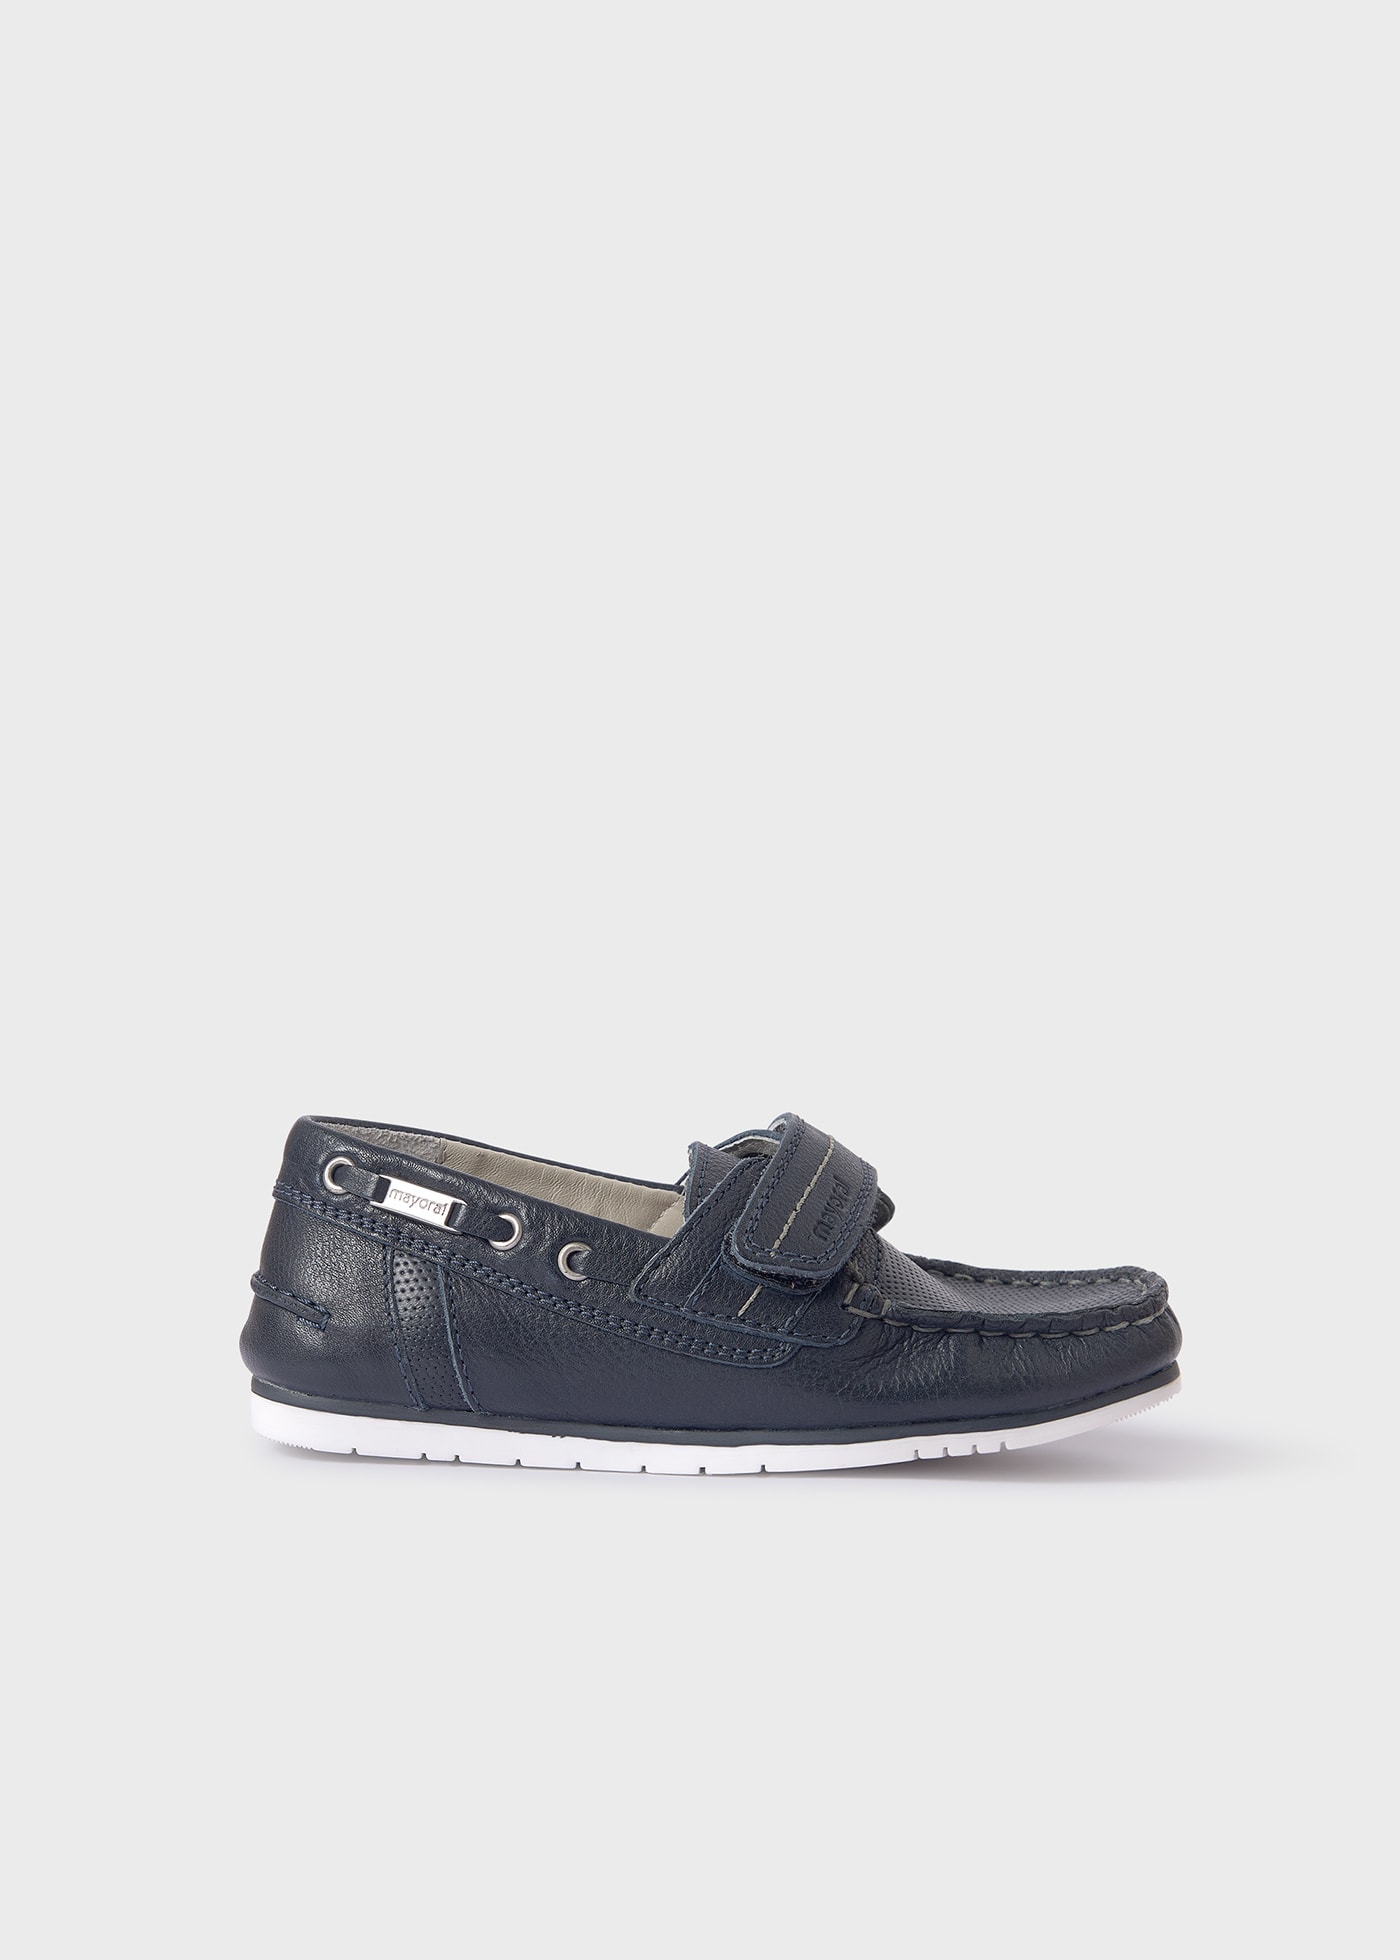 Boys leather boat shoes